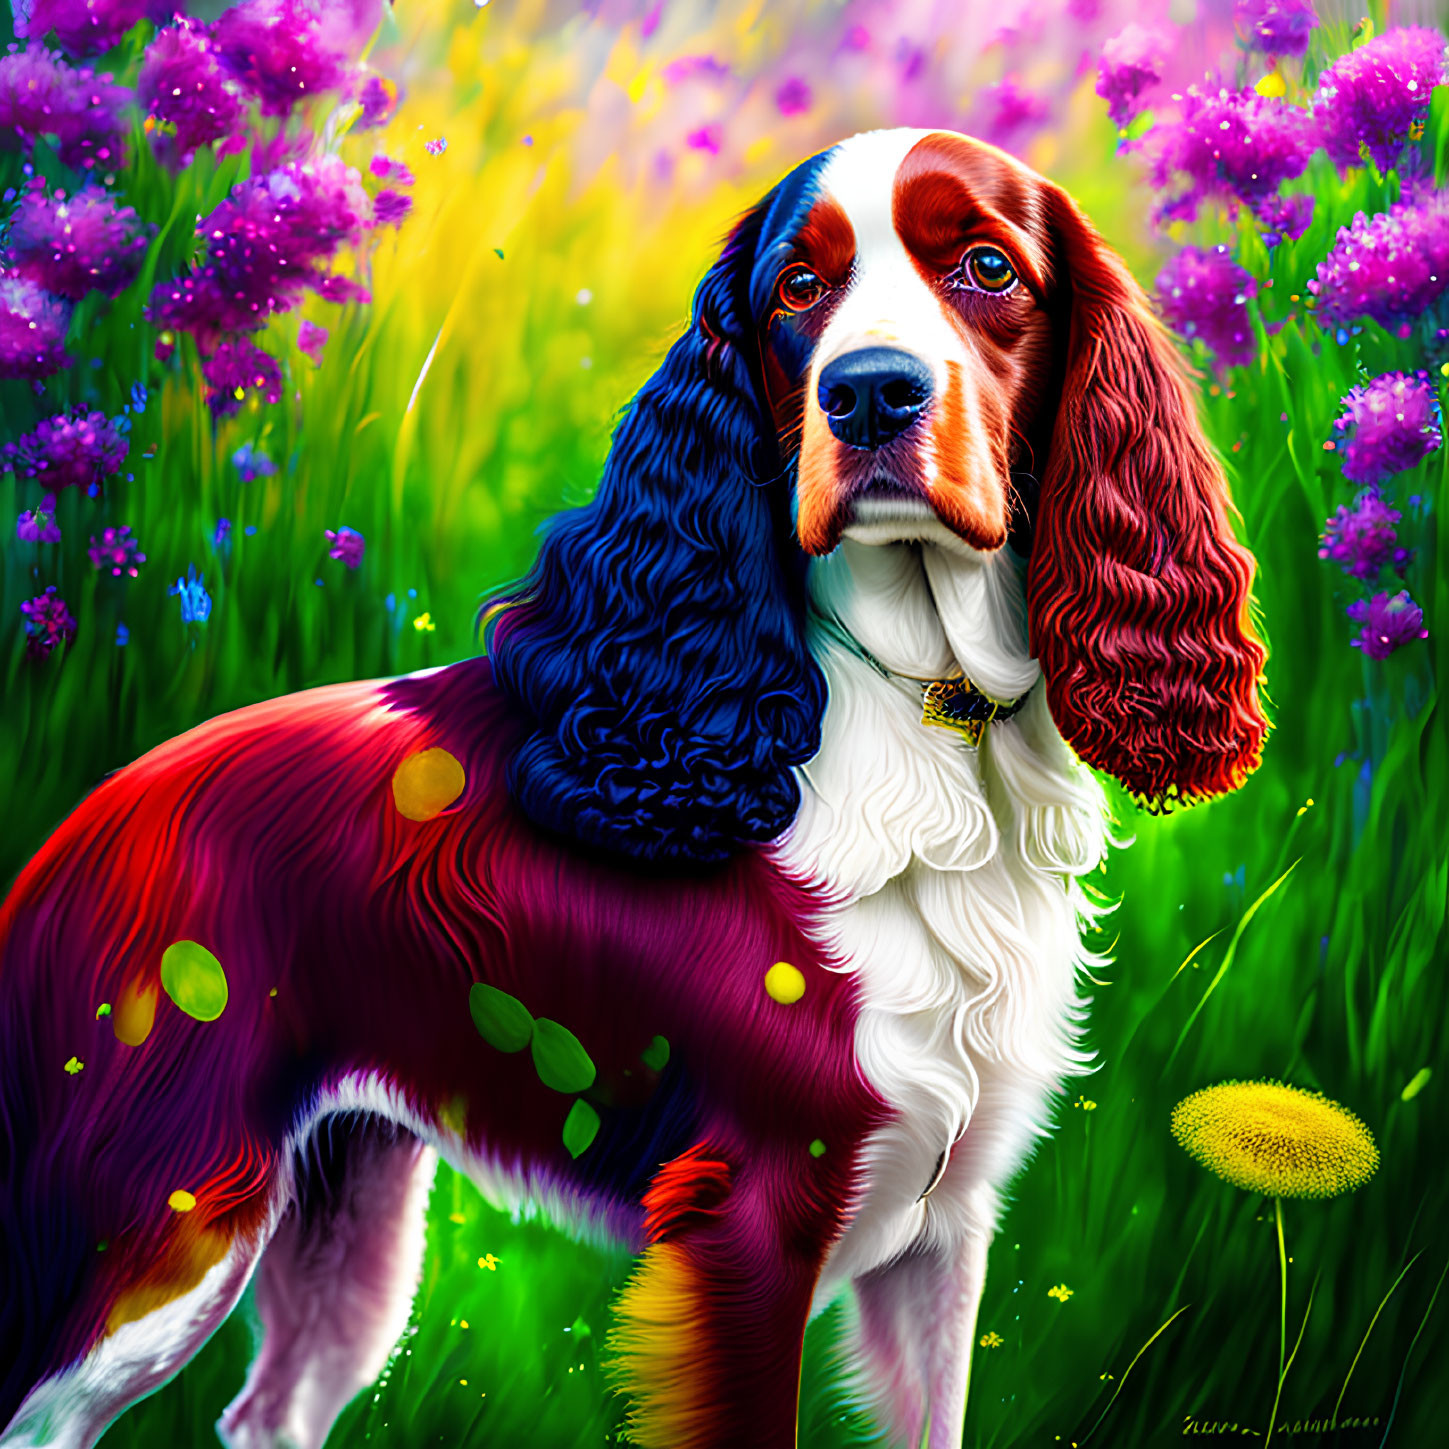 Colorful Spaniel Dog in Meadow with Purple Flowers and Bright Light Spots